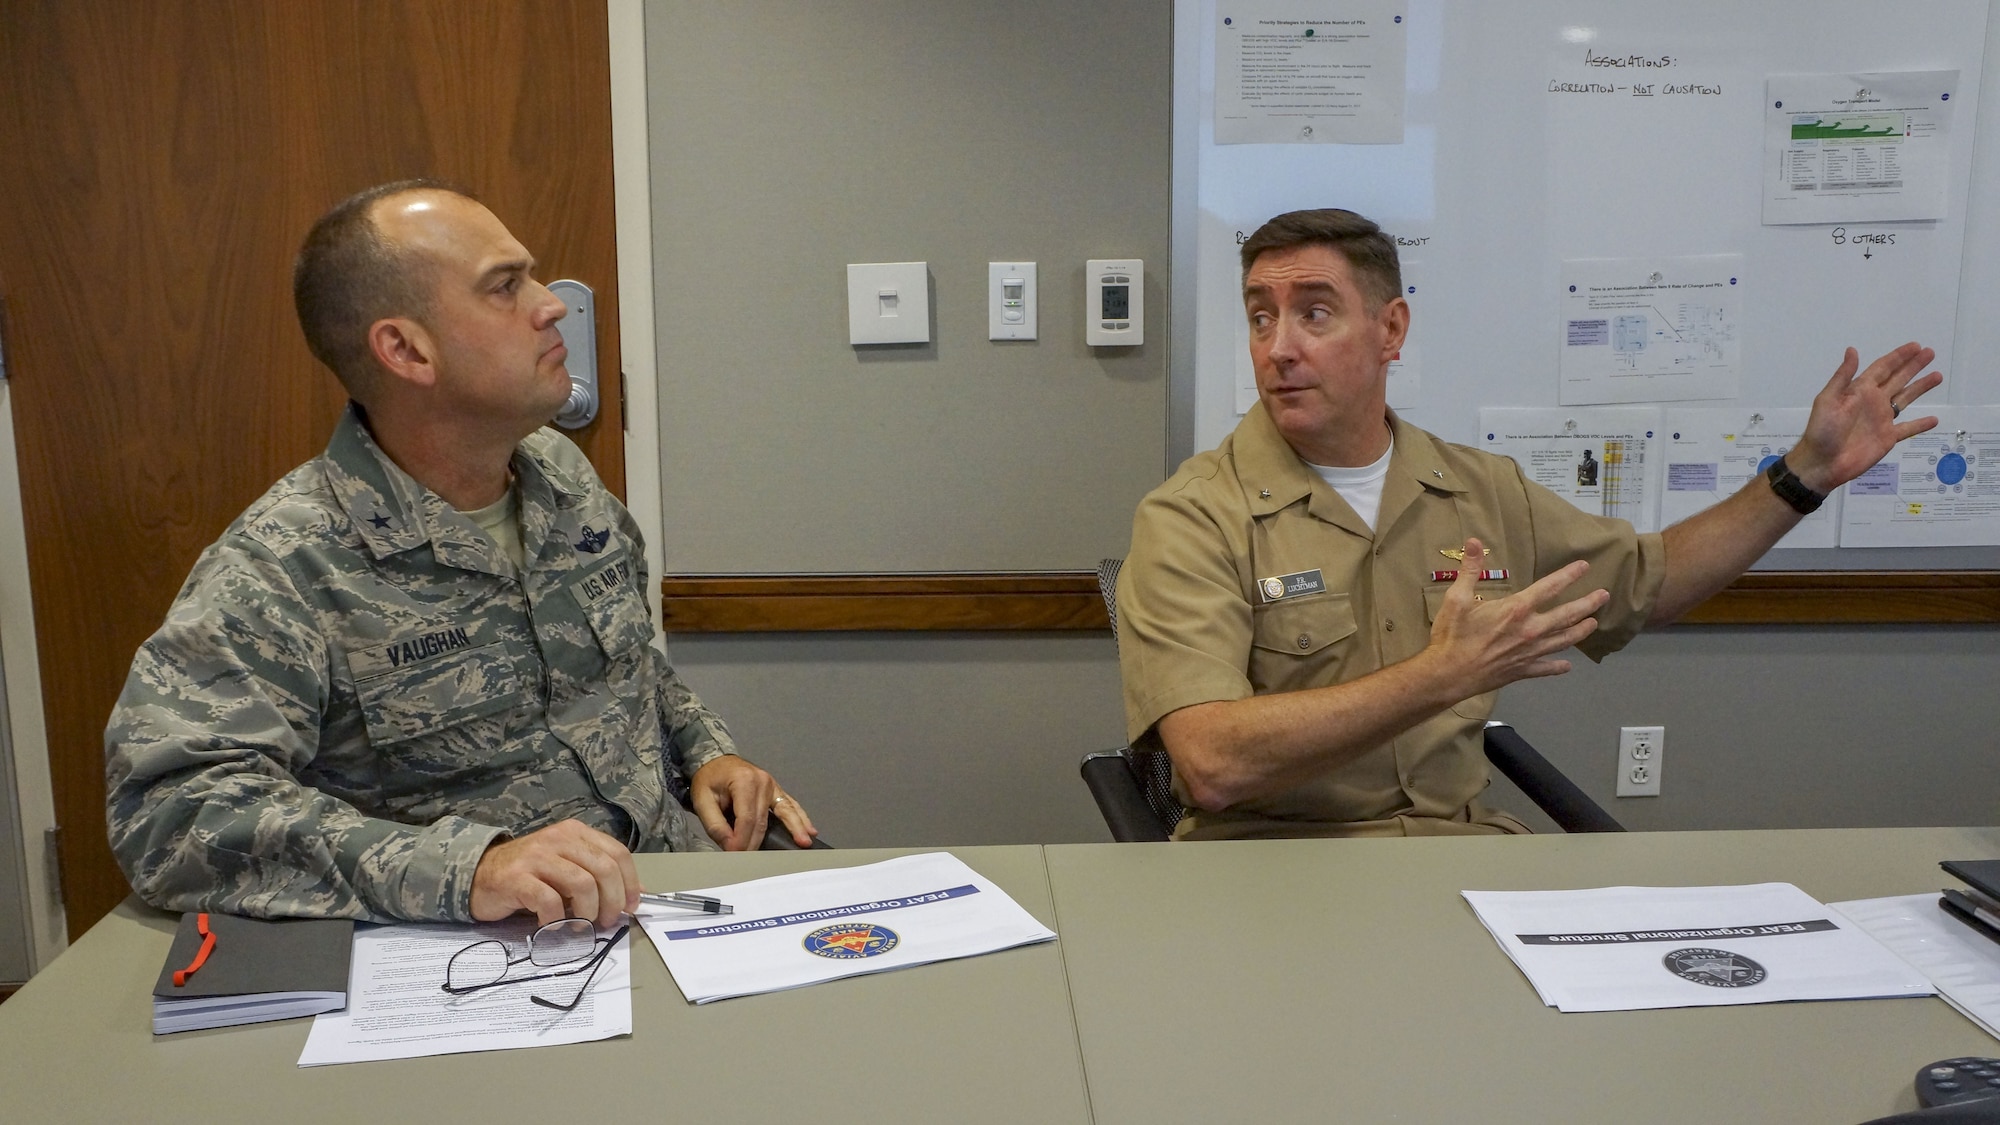 Air Force Brig. Gen. Edward L. Vaughan, head of the Air Force Unexplained Physiological Events Integration Team (UPE IT) and Rear Adm. Fredrick R. Luchtman, Navy Physiological Episodes Action Team (PEAT) lead, discuss ongoing efforts to minimize the risk of Physiological Episodes (PEs). The Navy and Air Force relationship enables the development of joint solutions to achieve a better understanding of the cockpit environment and oxygen systems to keep our aircrews safe. (U.S. Navy photo by Cmdr. Scot Cregan/Released